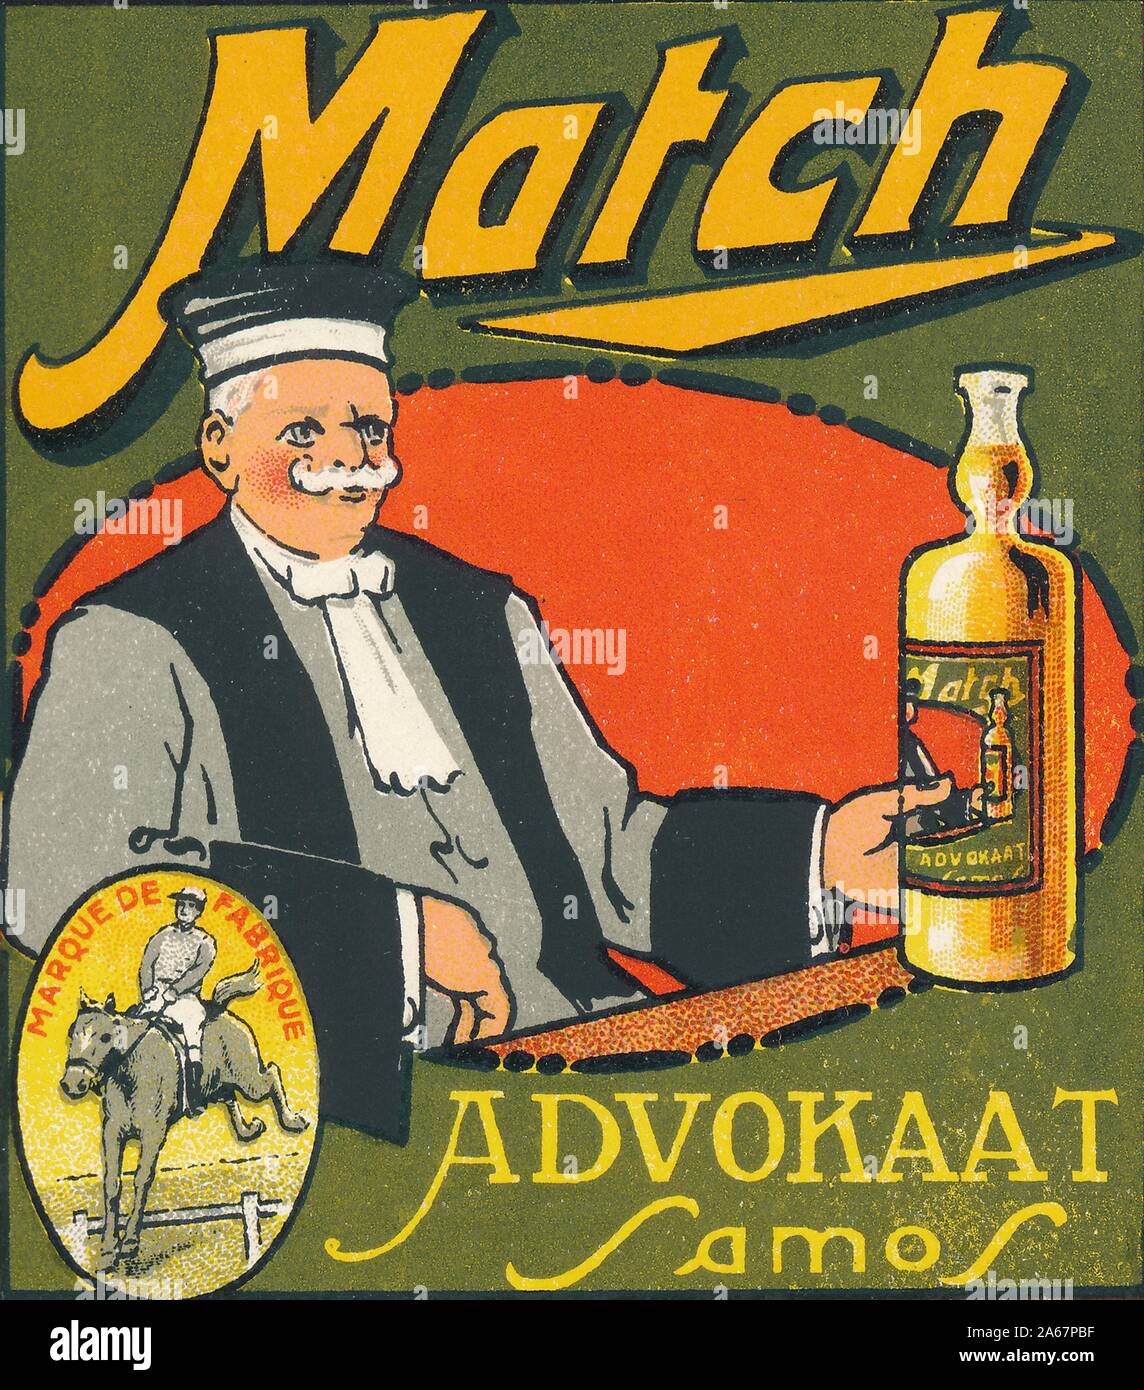 Vintage label from a bottle of 'Match Advokaat Samos, ' with an illustration of a seated lawyer holding a bottle of the eponymous Dutch advocaat liqueur, likely produced in the Netherlands, 1925. () Stock Photo